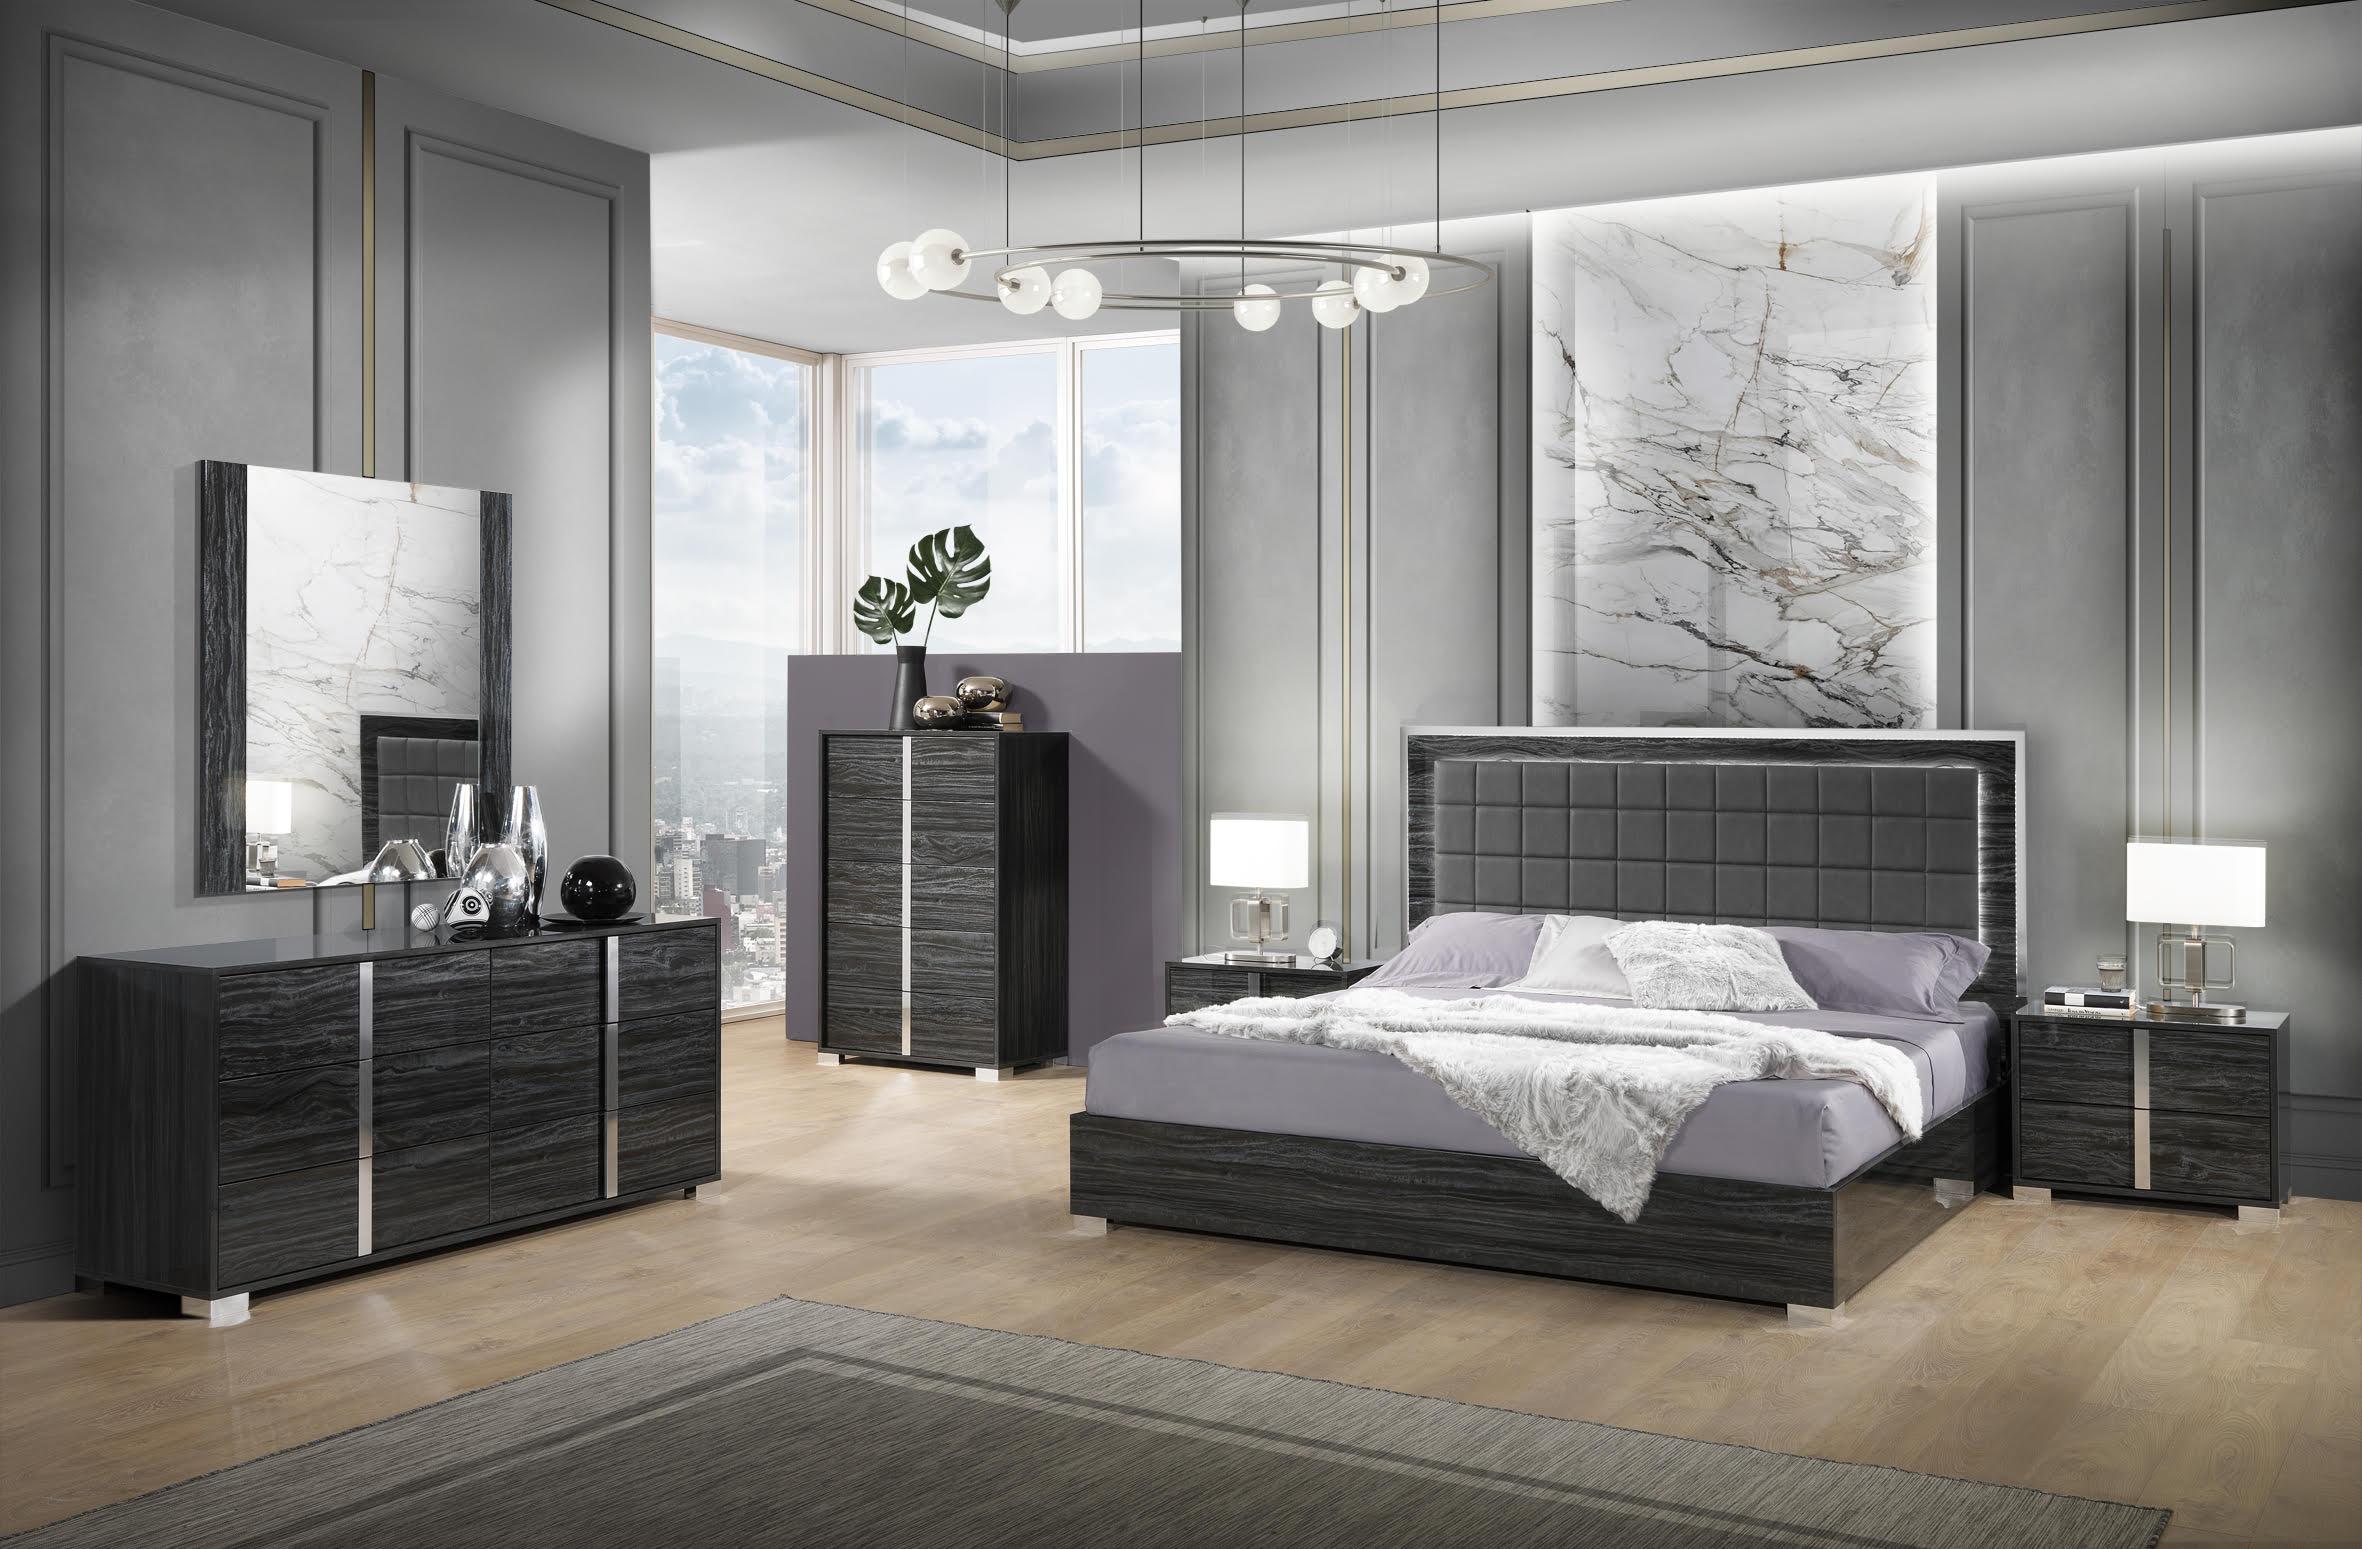 

    
Contemporary King Size Bedroom Set 6Pcs in Gloss Grey MADE IN ITALY J&M Alice
